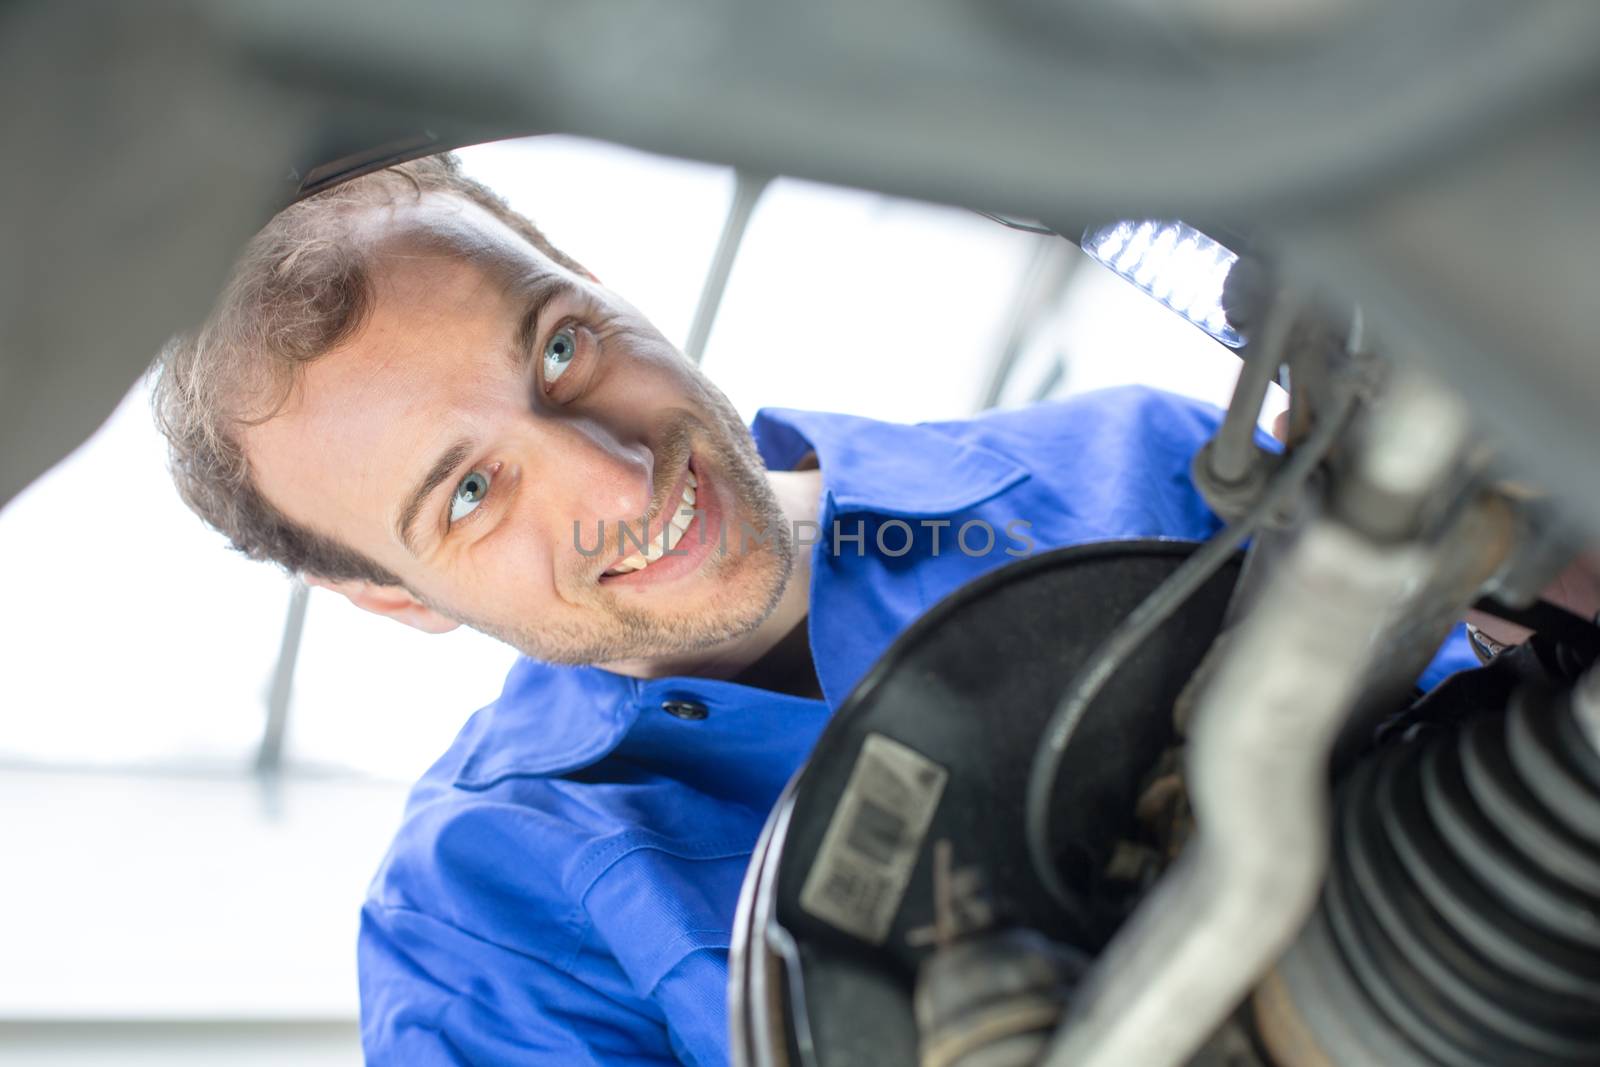 Car mechanic repairs the brakes of an automobile on a hydraulic lift